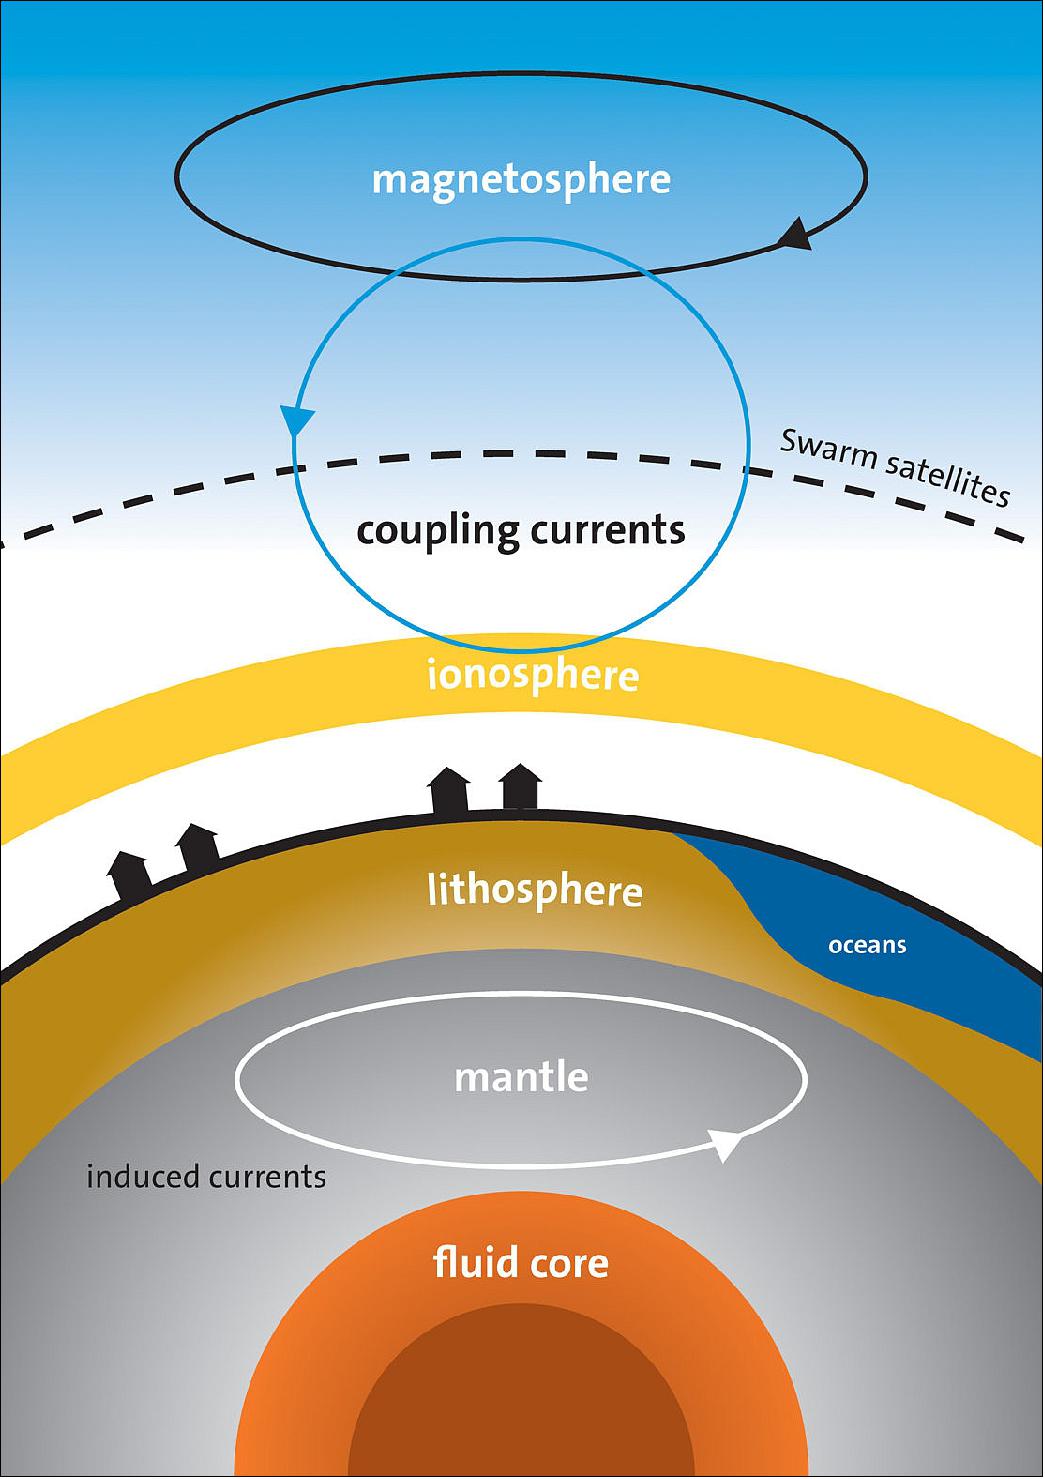 Figure 97: Magnetic field sources: The different sources that contribute to the magnetic field measured by Swarm. The coupling currents or field-aligned currents flow along magnetic field lines between the magnetosphere and ionosphere (image credit: ESA/DTU Space)